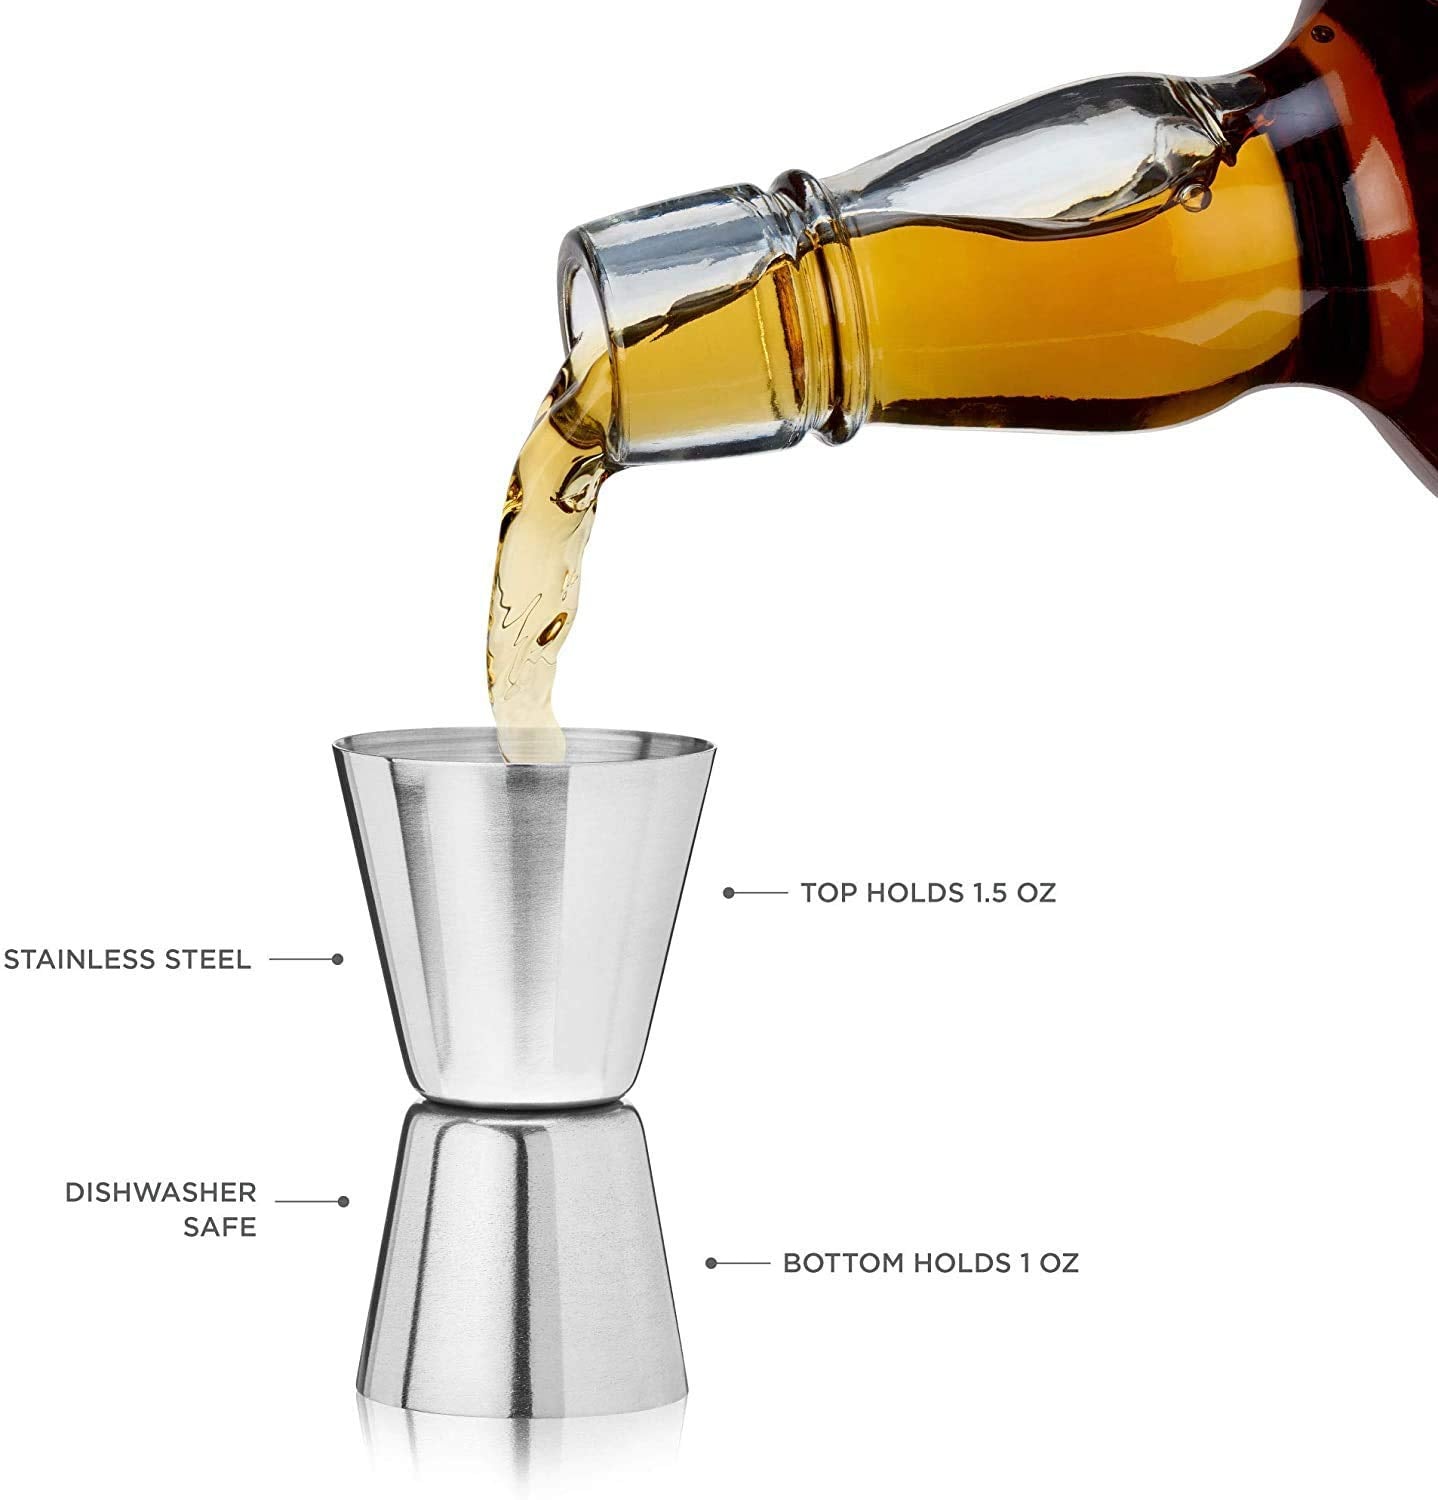 Rudra Exports Cocktail Shaker (Boston Shaker) -Martini Drink Mixer - Professional barware Bartender Tool - for Alcohol Drinks